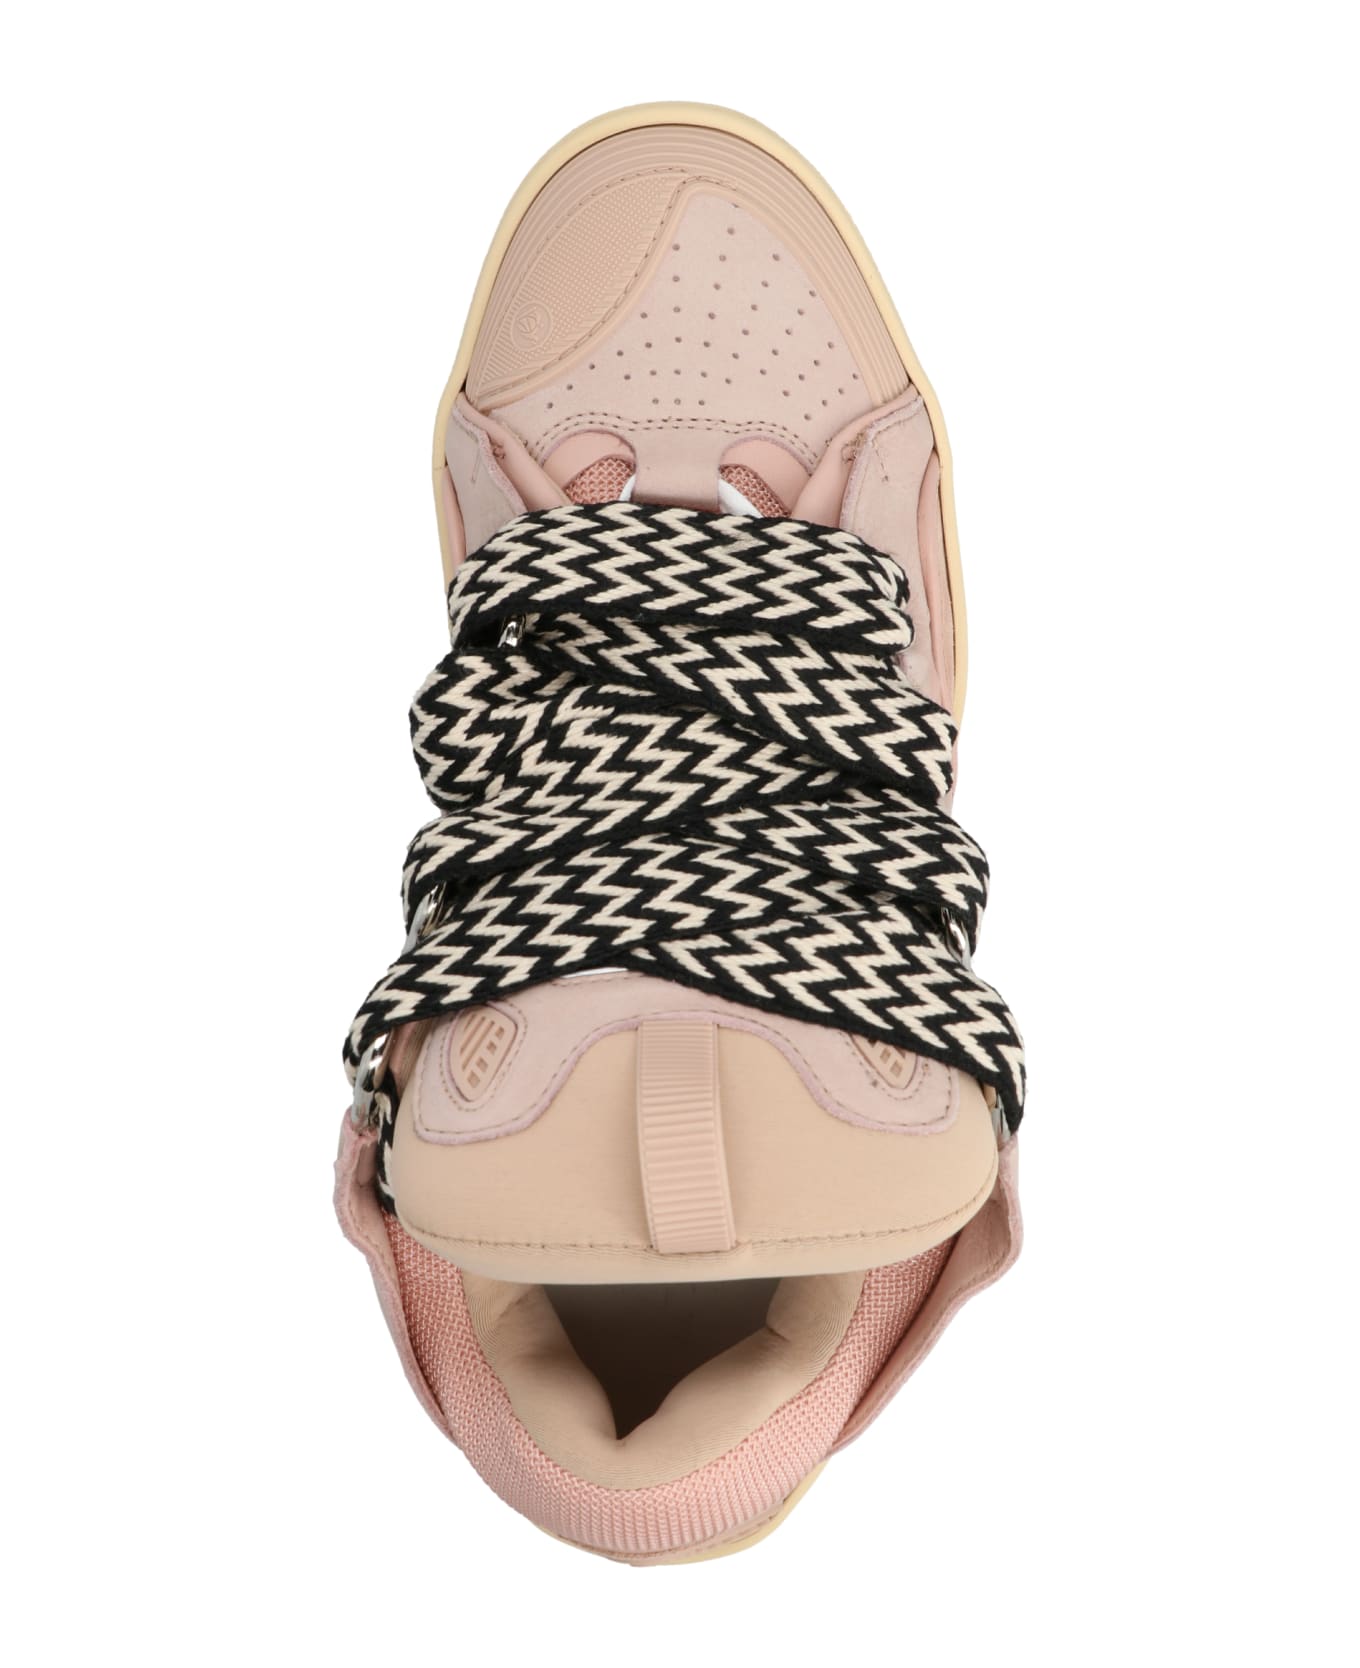 Lanvin 'curb' Sneakers - Pink